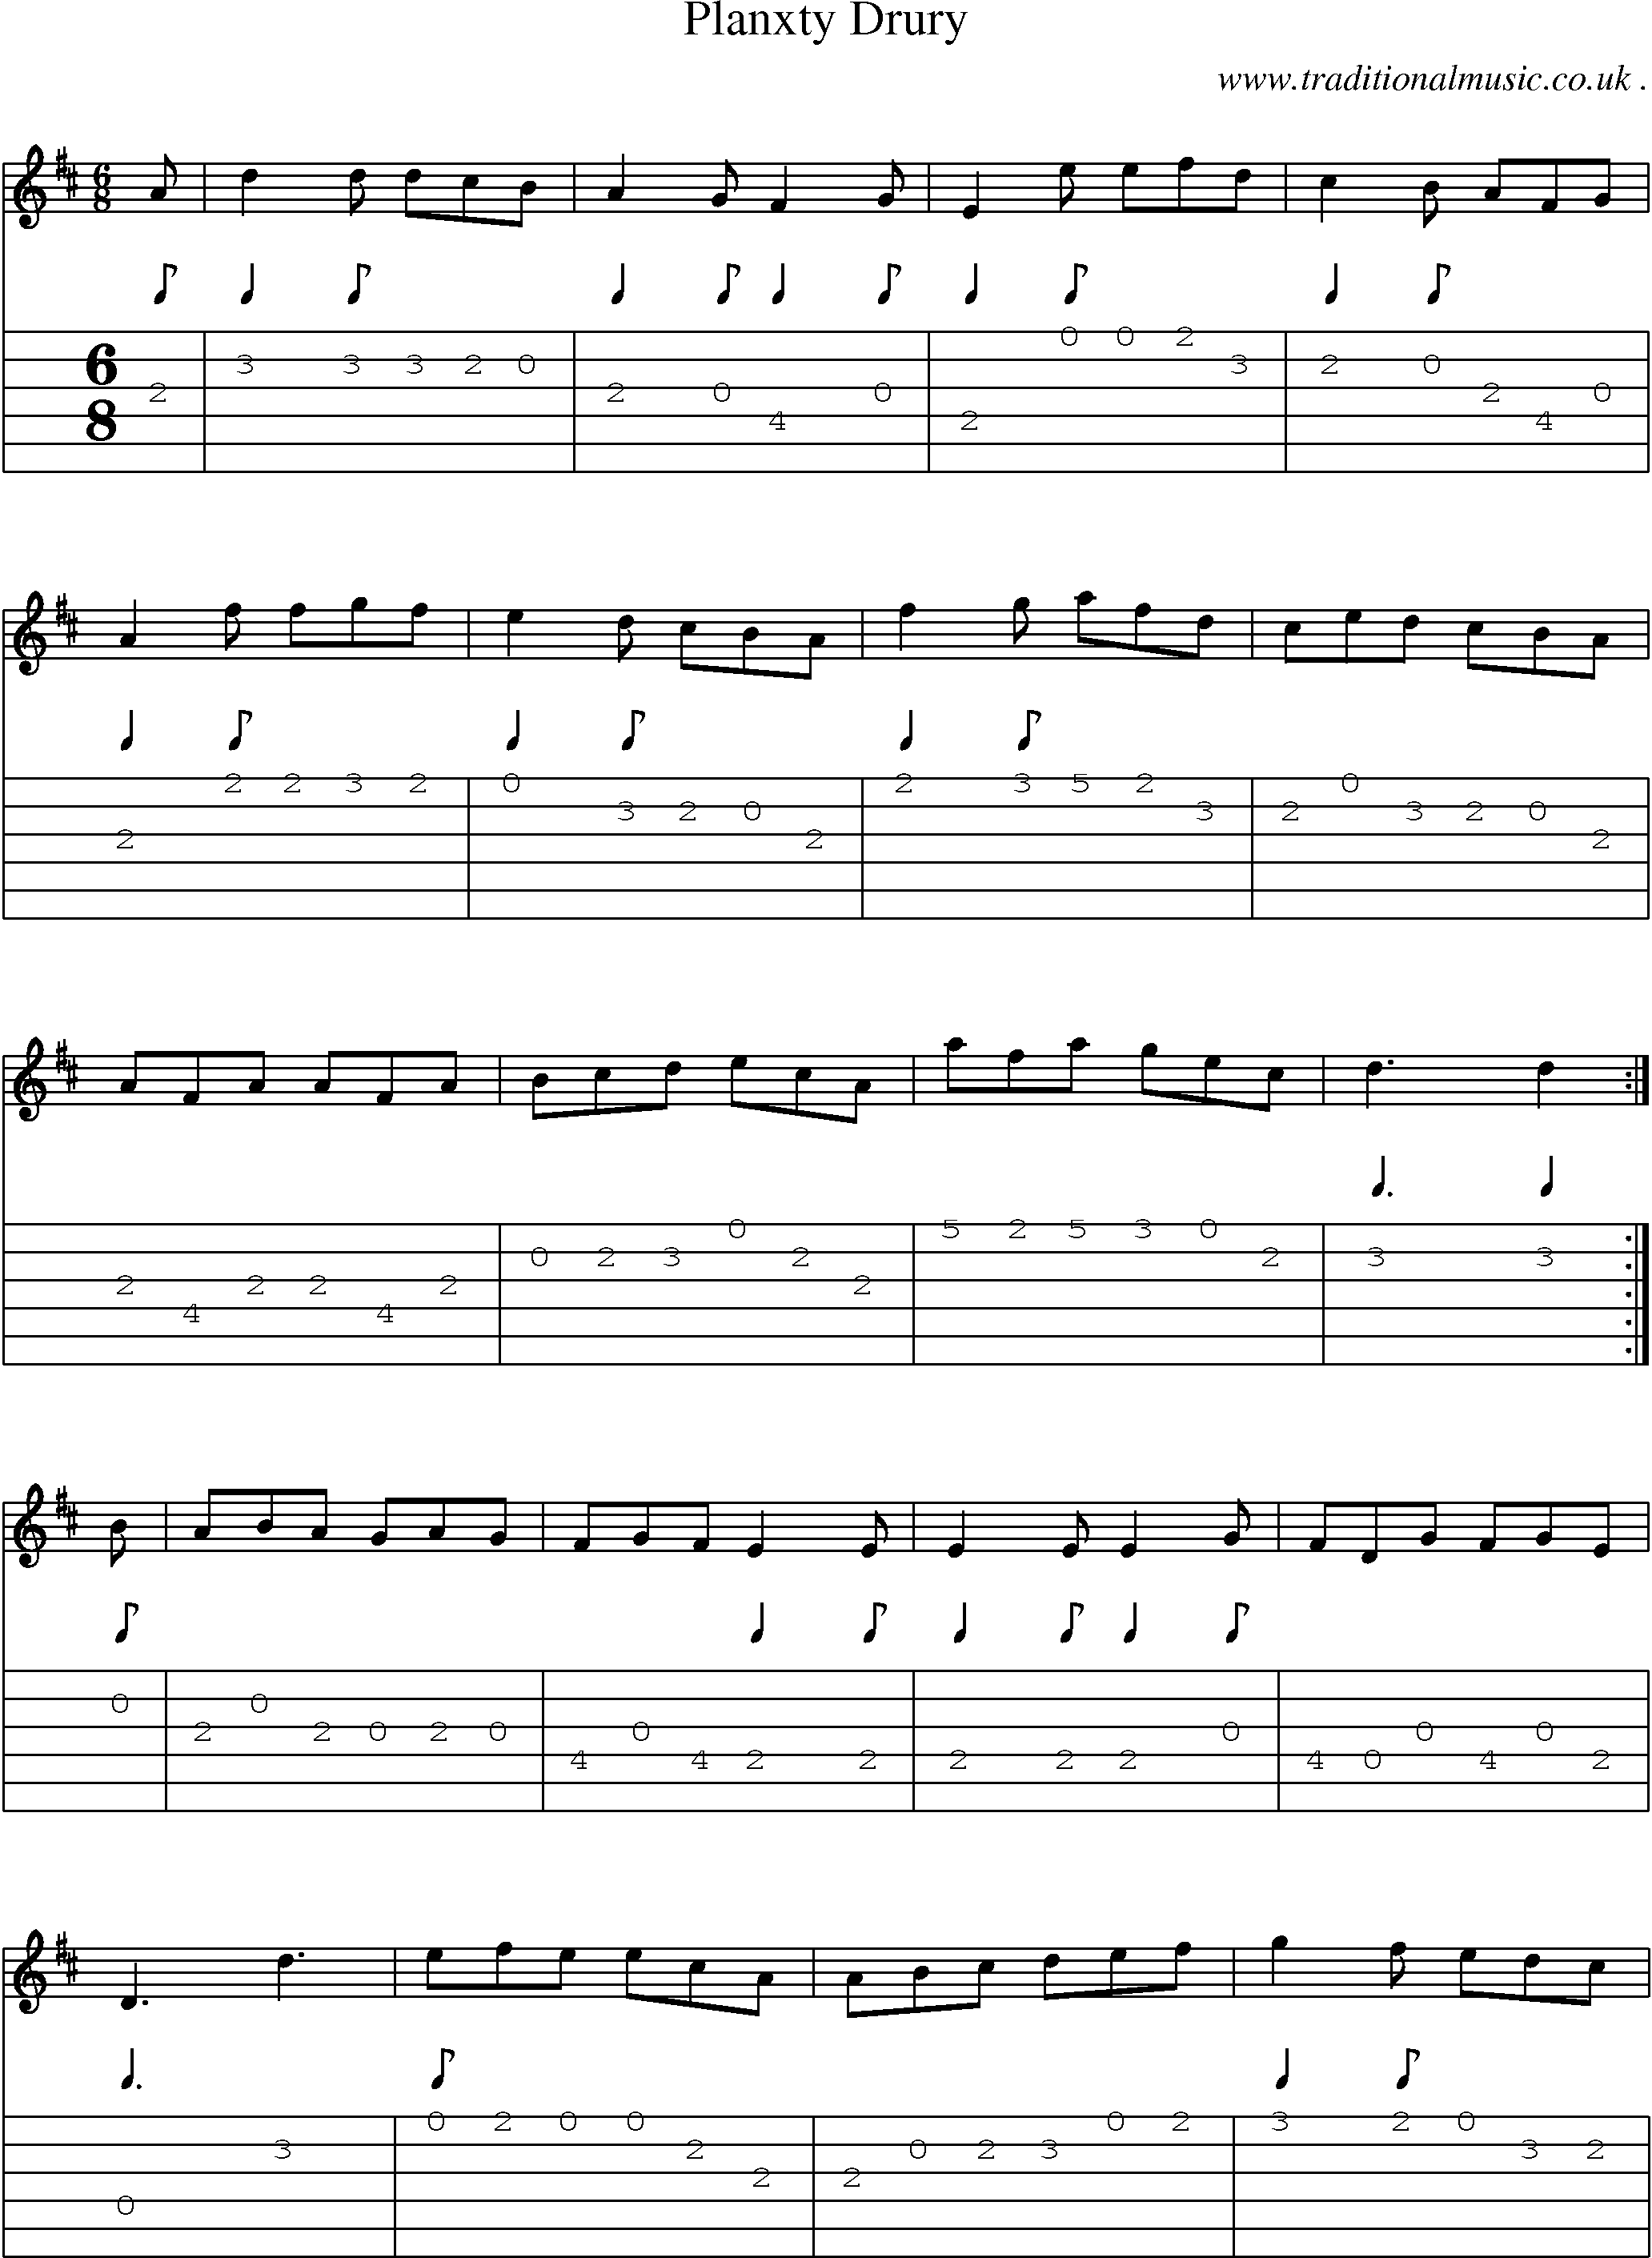 Sheet-Music and Guitar Tabs for Planxty Drury